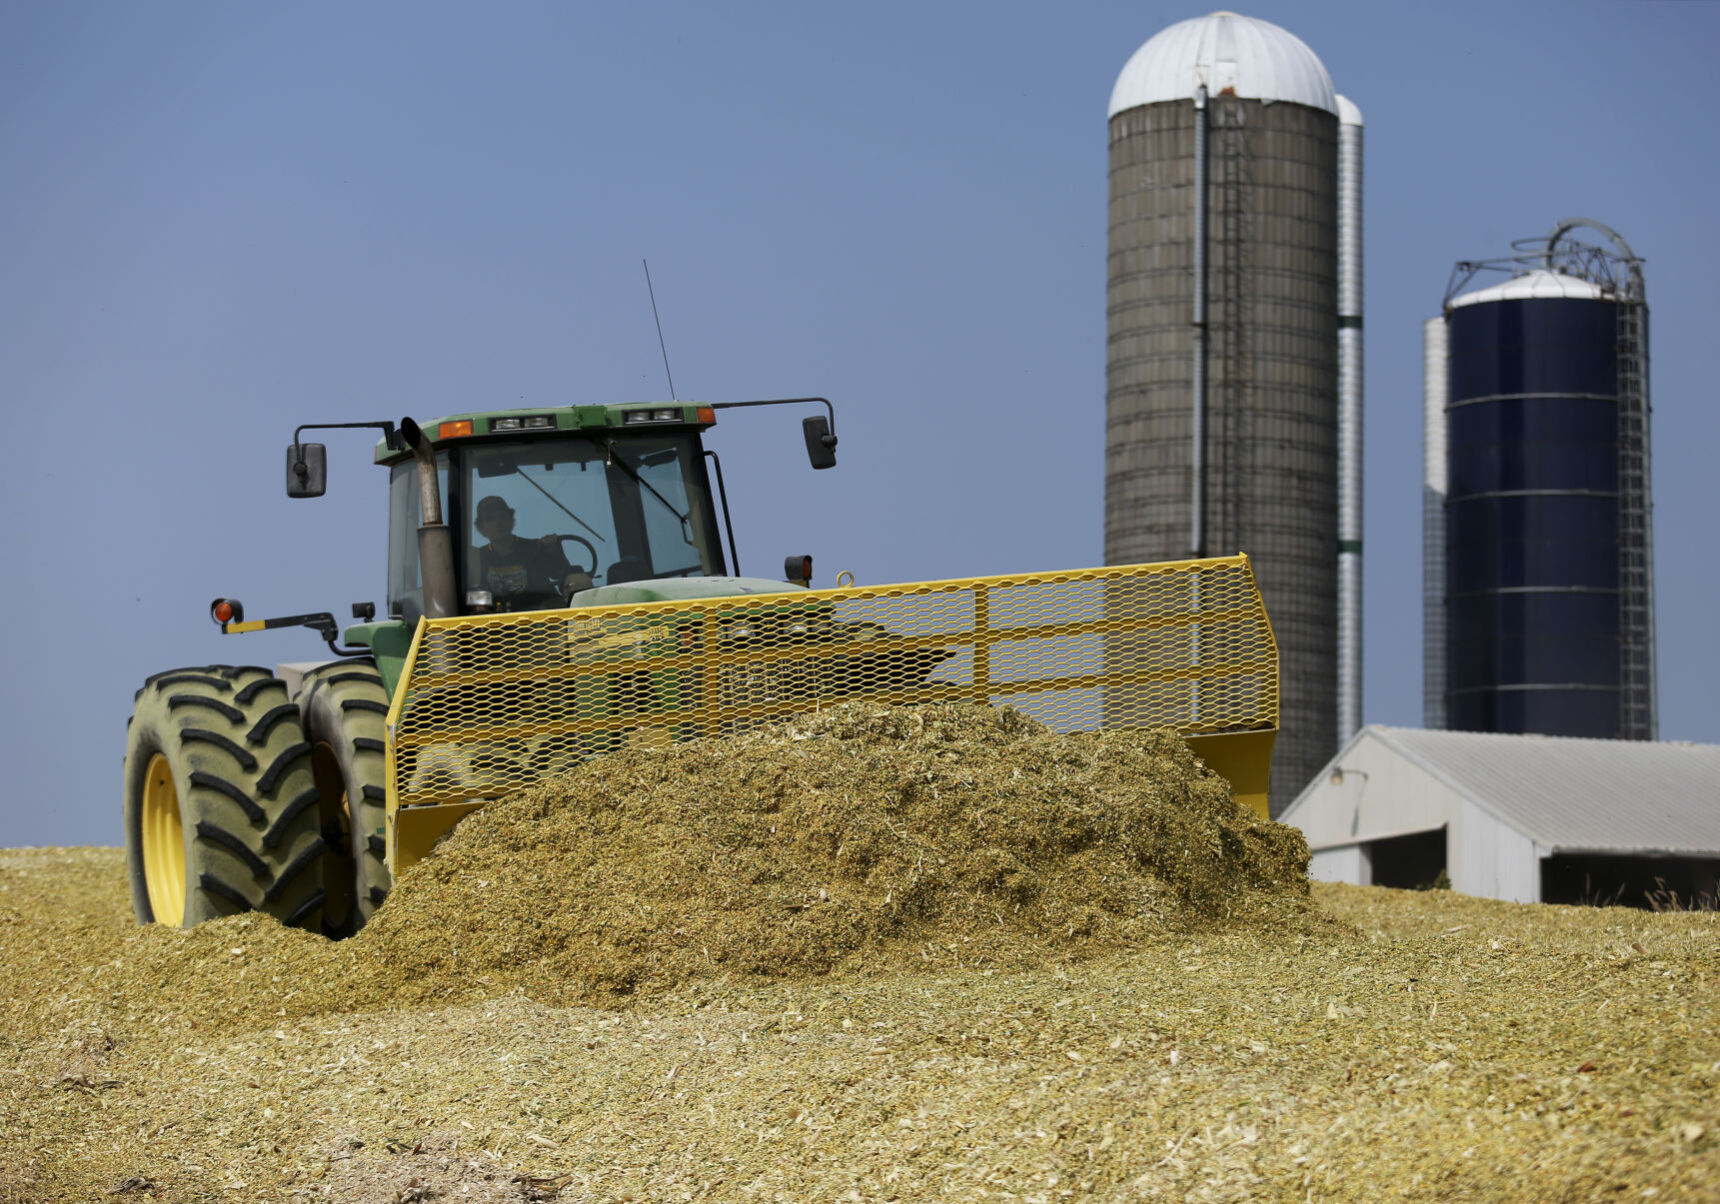 Andy Recker packs chopped earlage at the Recker farm. PHOTO CREDIT: NICKI KOHL